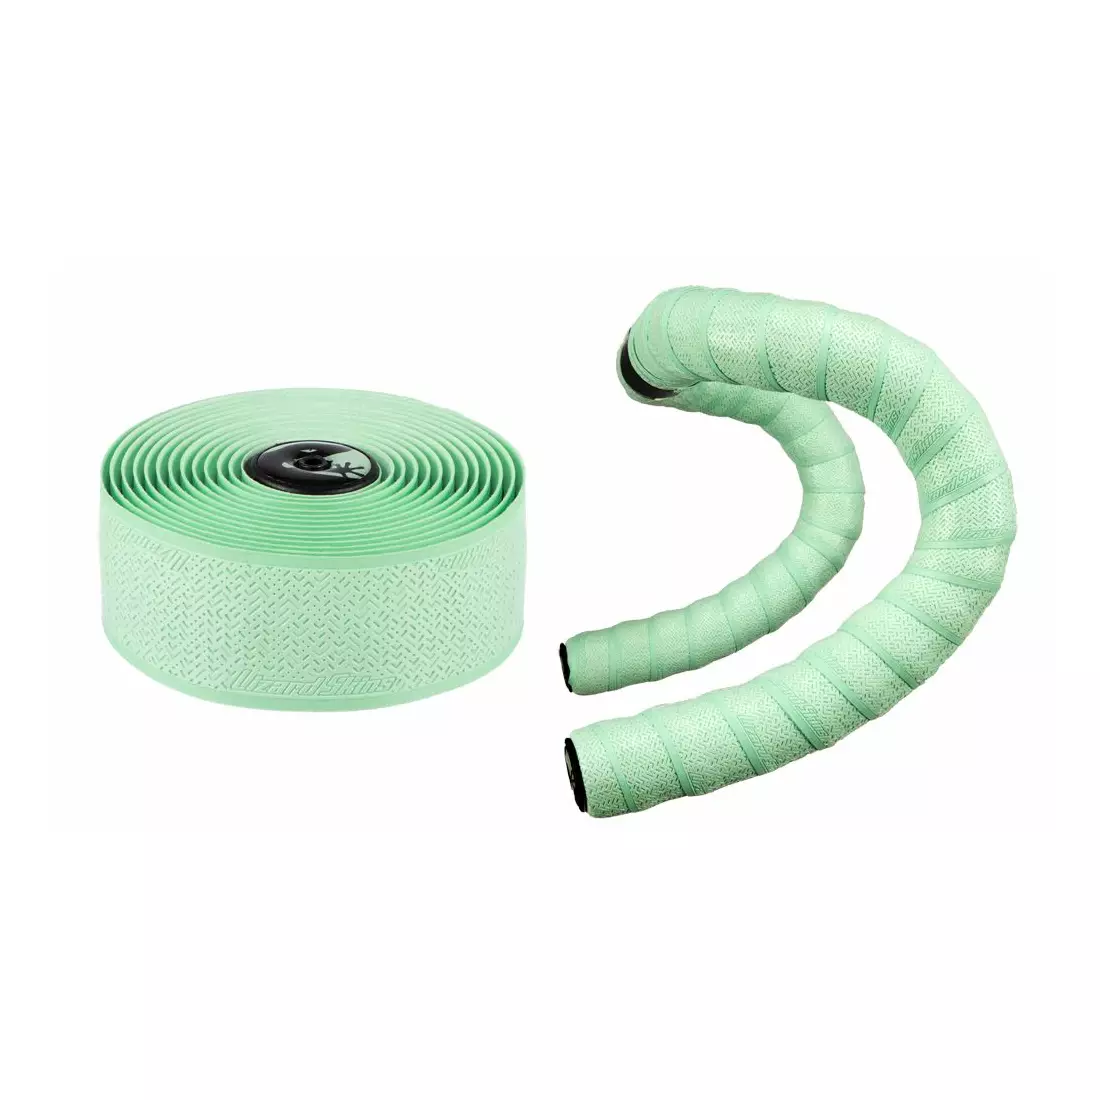 LIZARDSKINS bicycle handlebar wrap dsp 1.8 race bar tape 1,8mm mint green LZS-DSPCY176